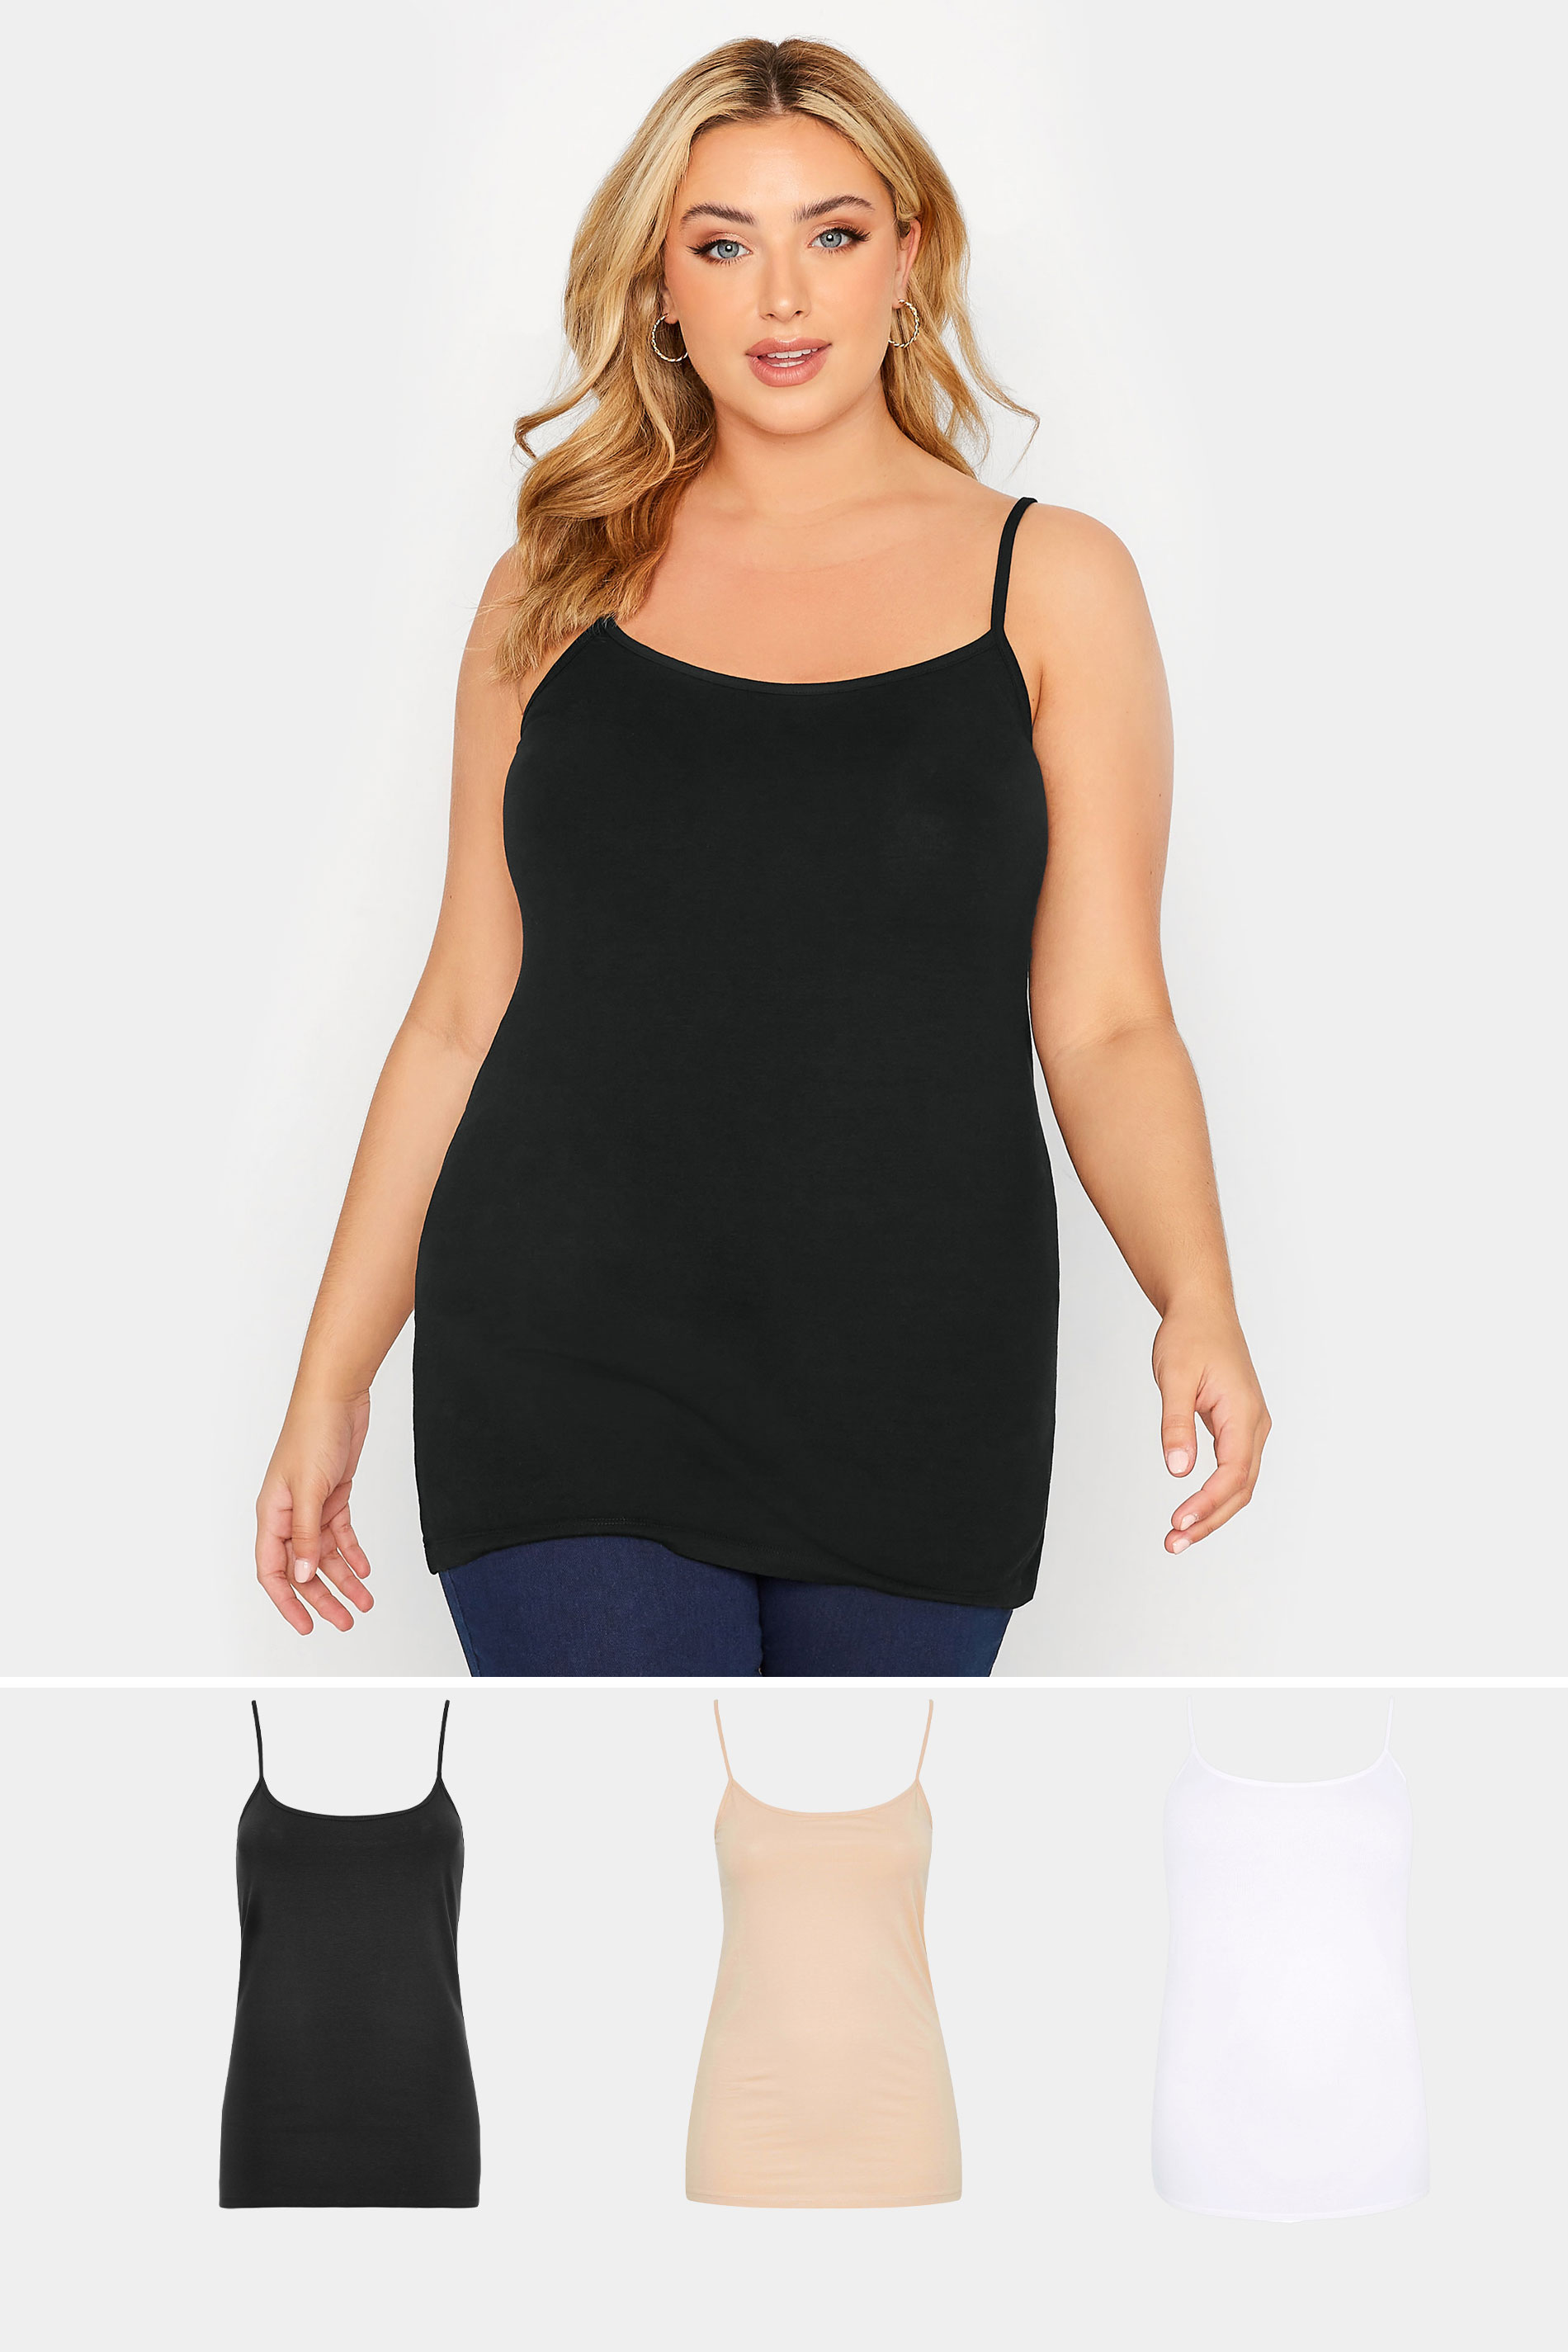  3 PACK Plus Size Black & White Cami Tops | Yours Clothing  1